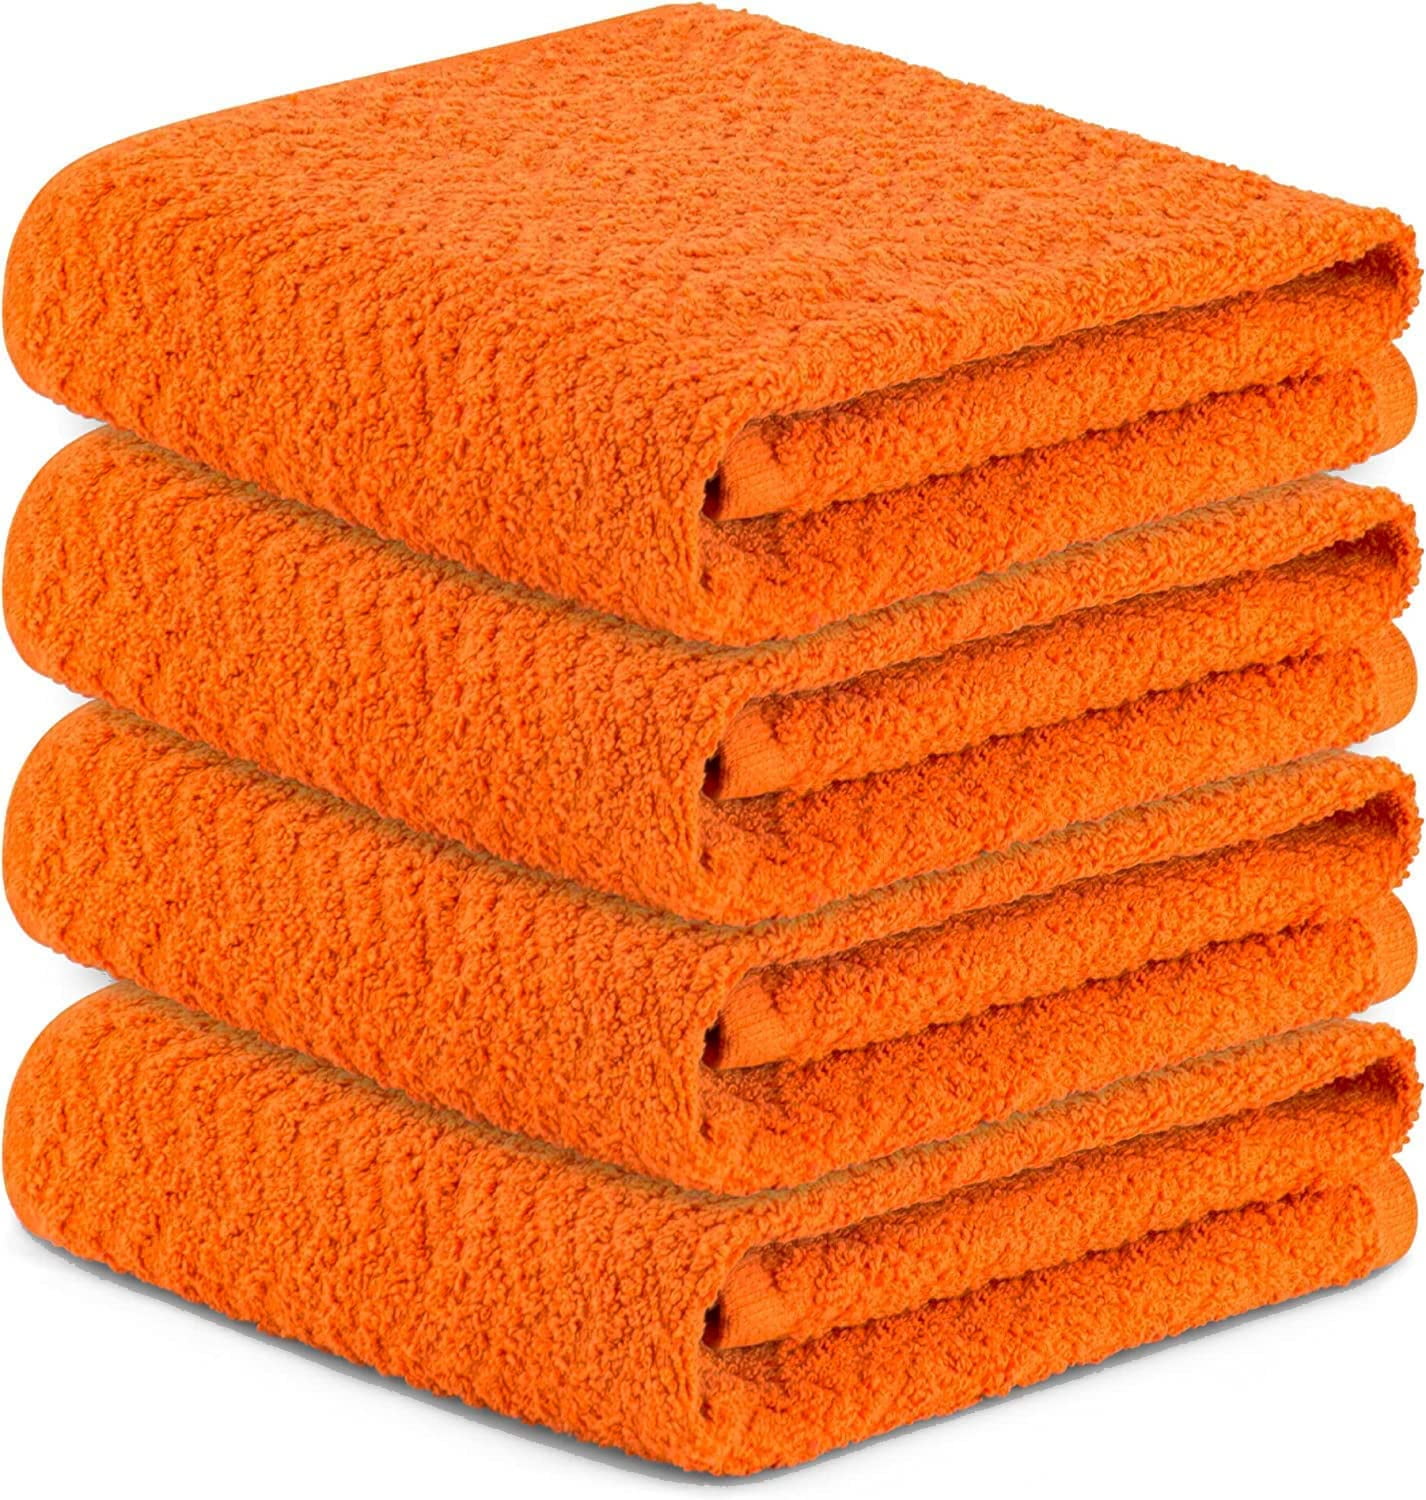  DecorRack 4 Large Kitchen Towels, 100% Cotton, 15 x 25 inches,  Absorbent Dish Drying Cloth, Perfect for Kitchen, Solid Color Hand Towels,  Yellow (4 Pack) : Home & Kitchen